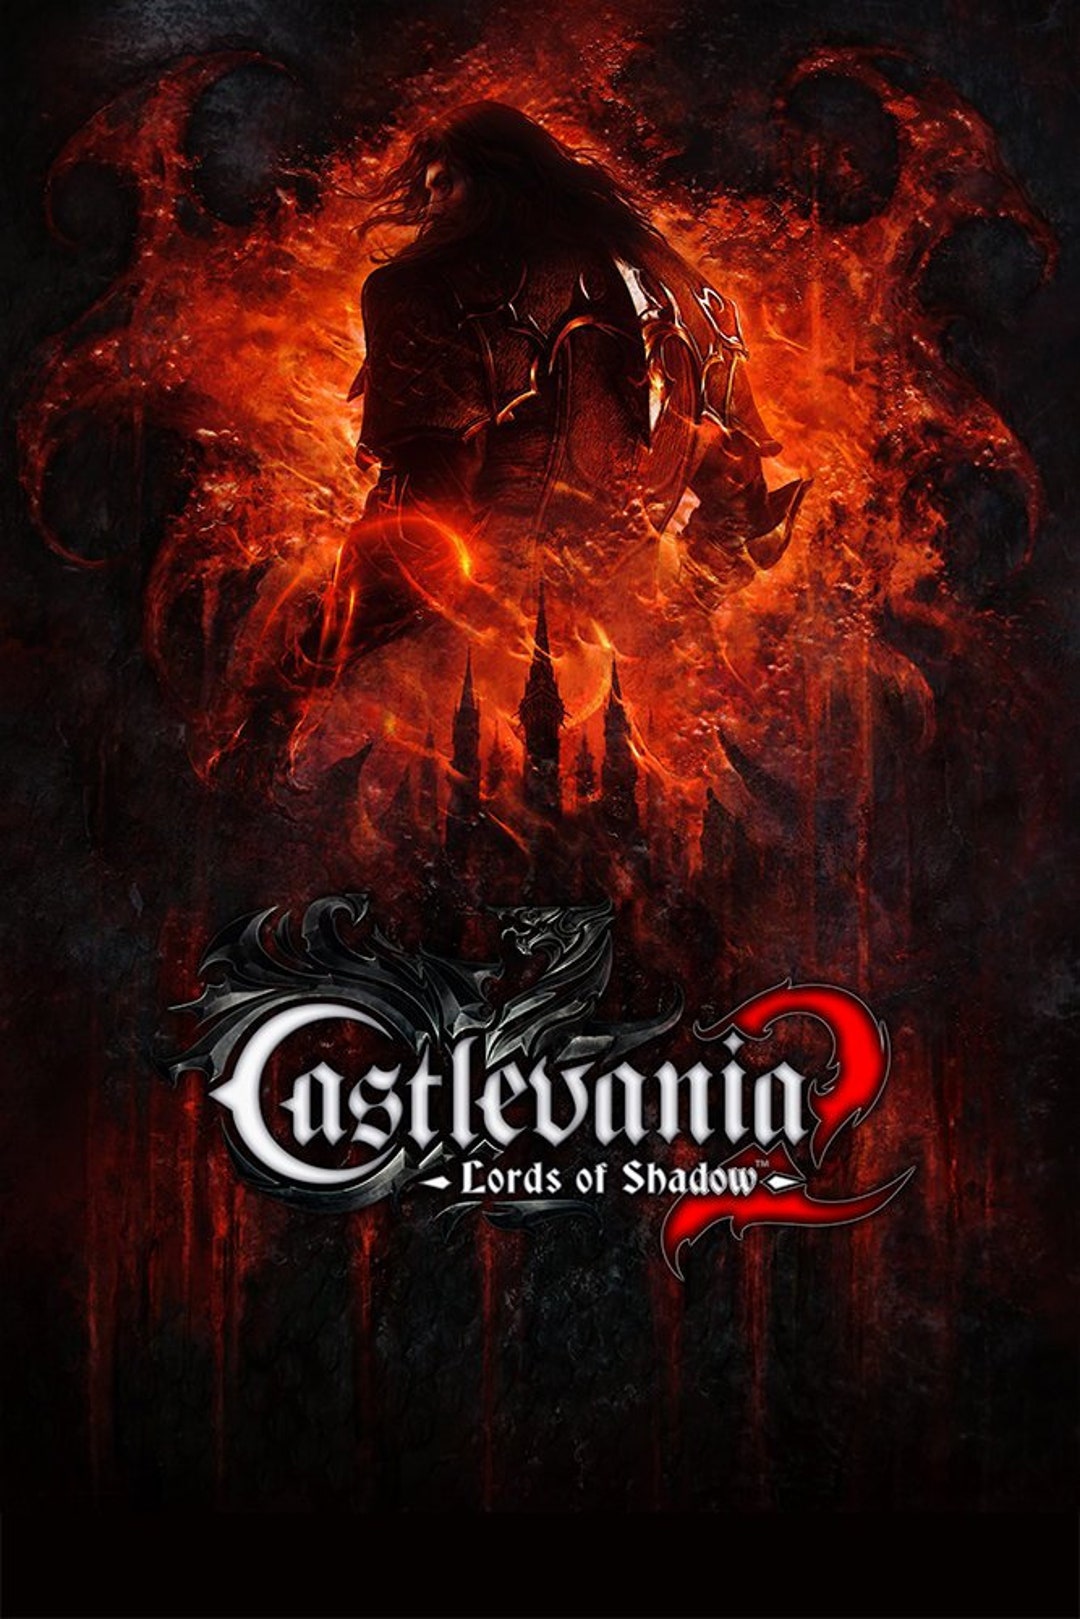 Castlevania 2 Lords of Shadow Poster 